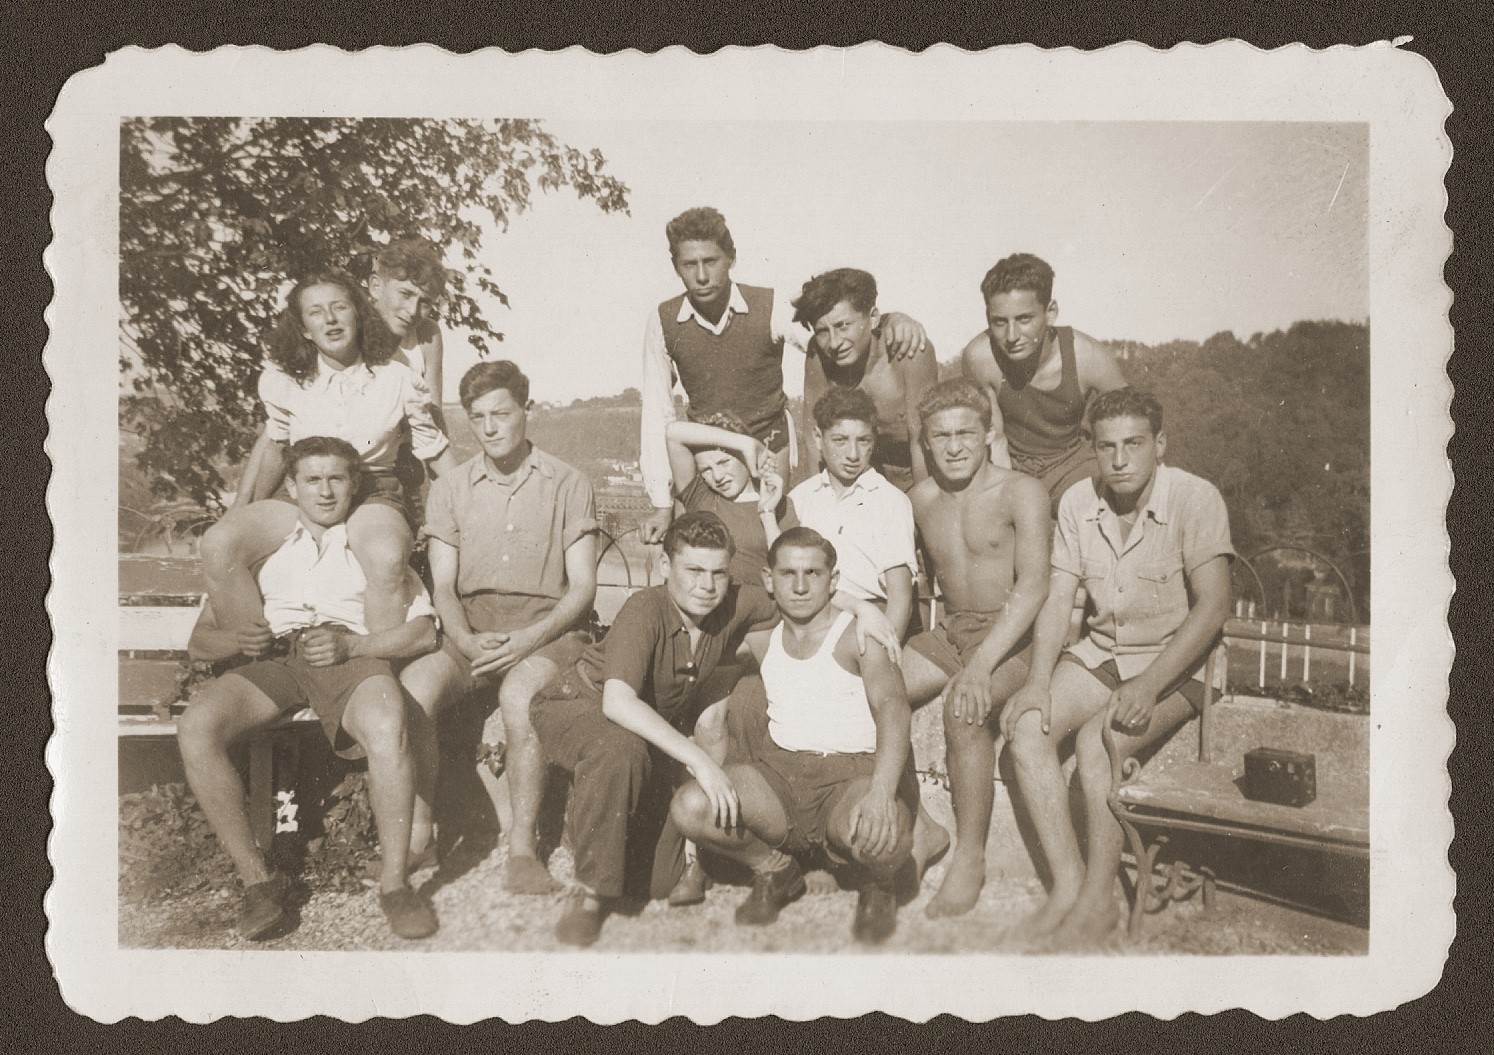 Group portrait of Jewish youth living at the OSE (Oeuvre de Secours aux Enfants) children's home at Collognes au Mont d'or.  

Among those pictured are Siegfried Weissmann (first row in the white tank top) and Kurt Leuchter (standing on the far right).